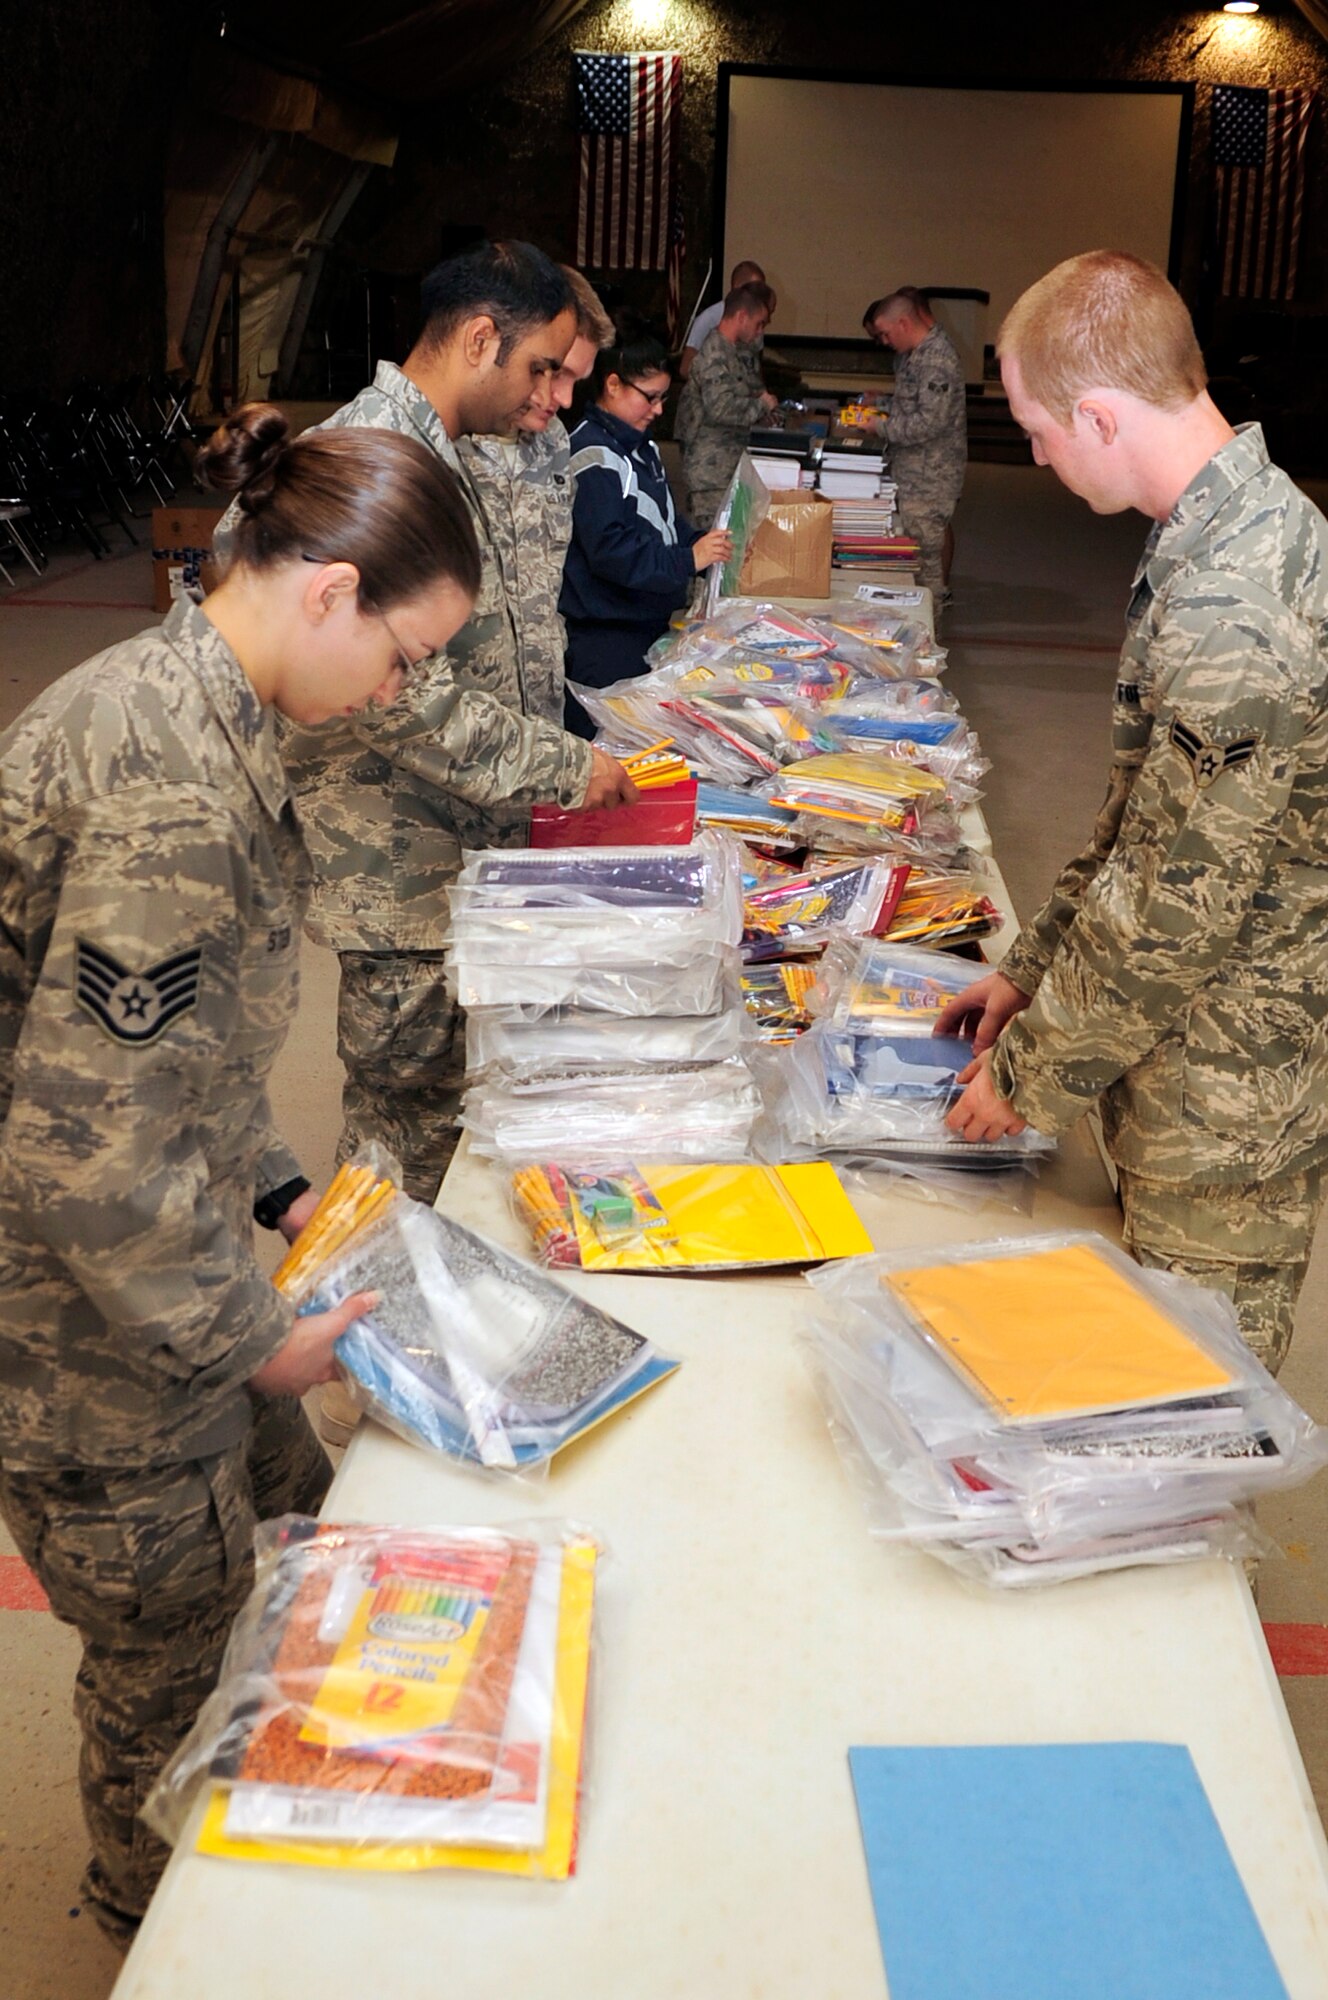 Ali Airmend sort, prepare and package school items headed to local Iraqi school children.  The supplies are donated by stateside organizations through thte efforts of Airmen stationed here.  (U.S. Air Force photo/Released)